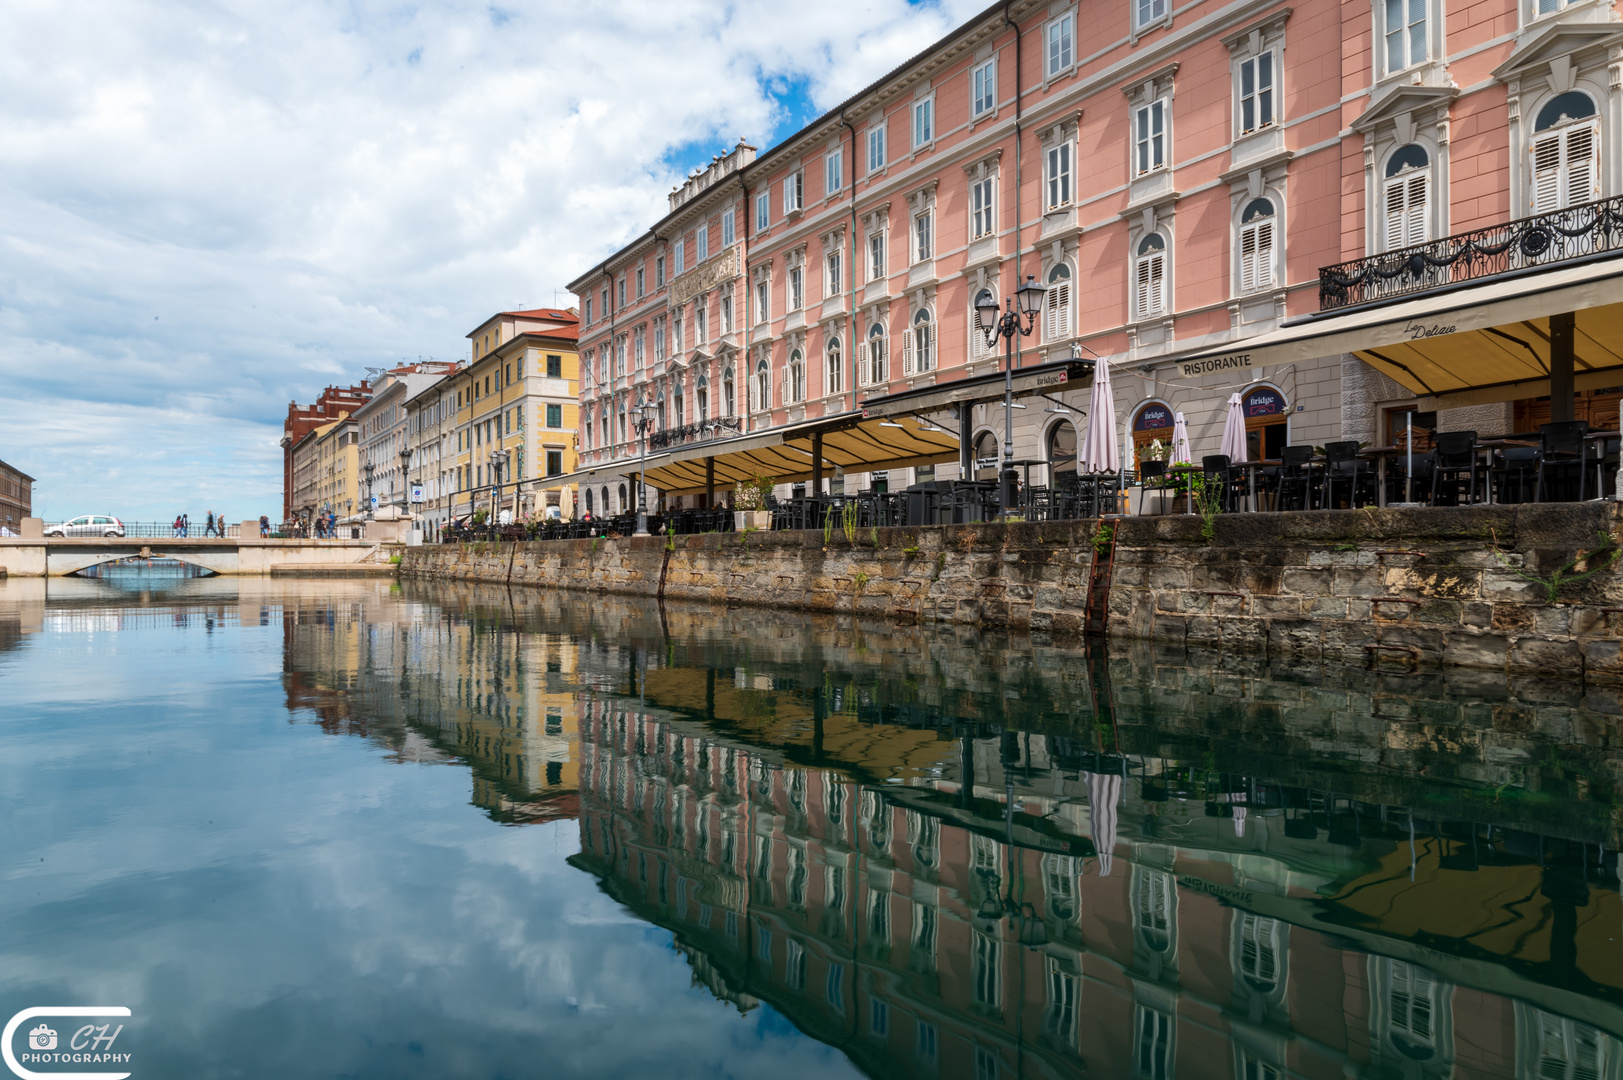 The mirror of Trieste ;-)